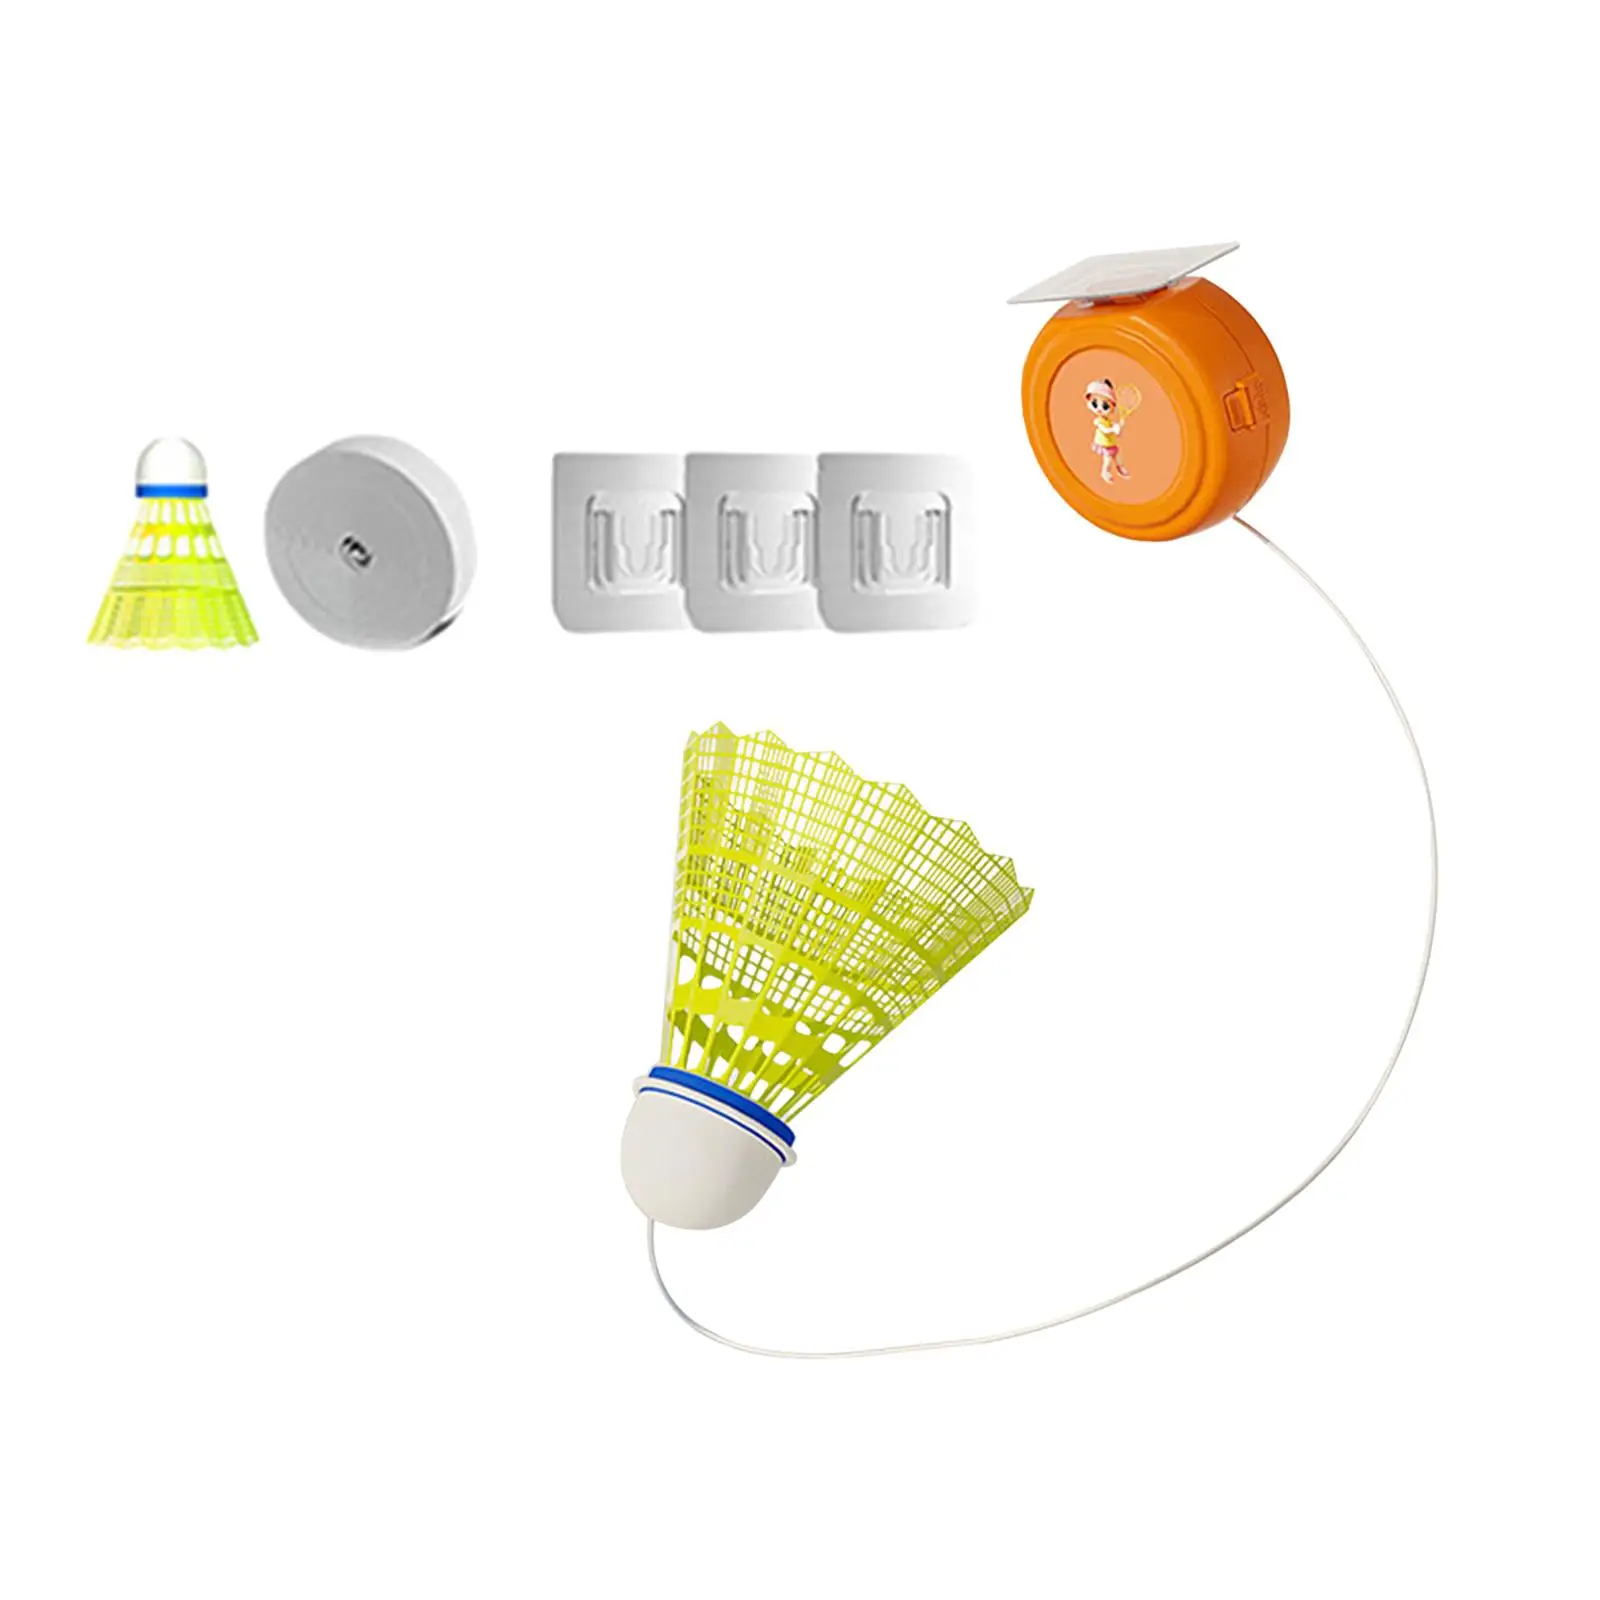 Badminton Solo Trainer, Badminton Training Device with Shuttlecock, Adjustable